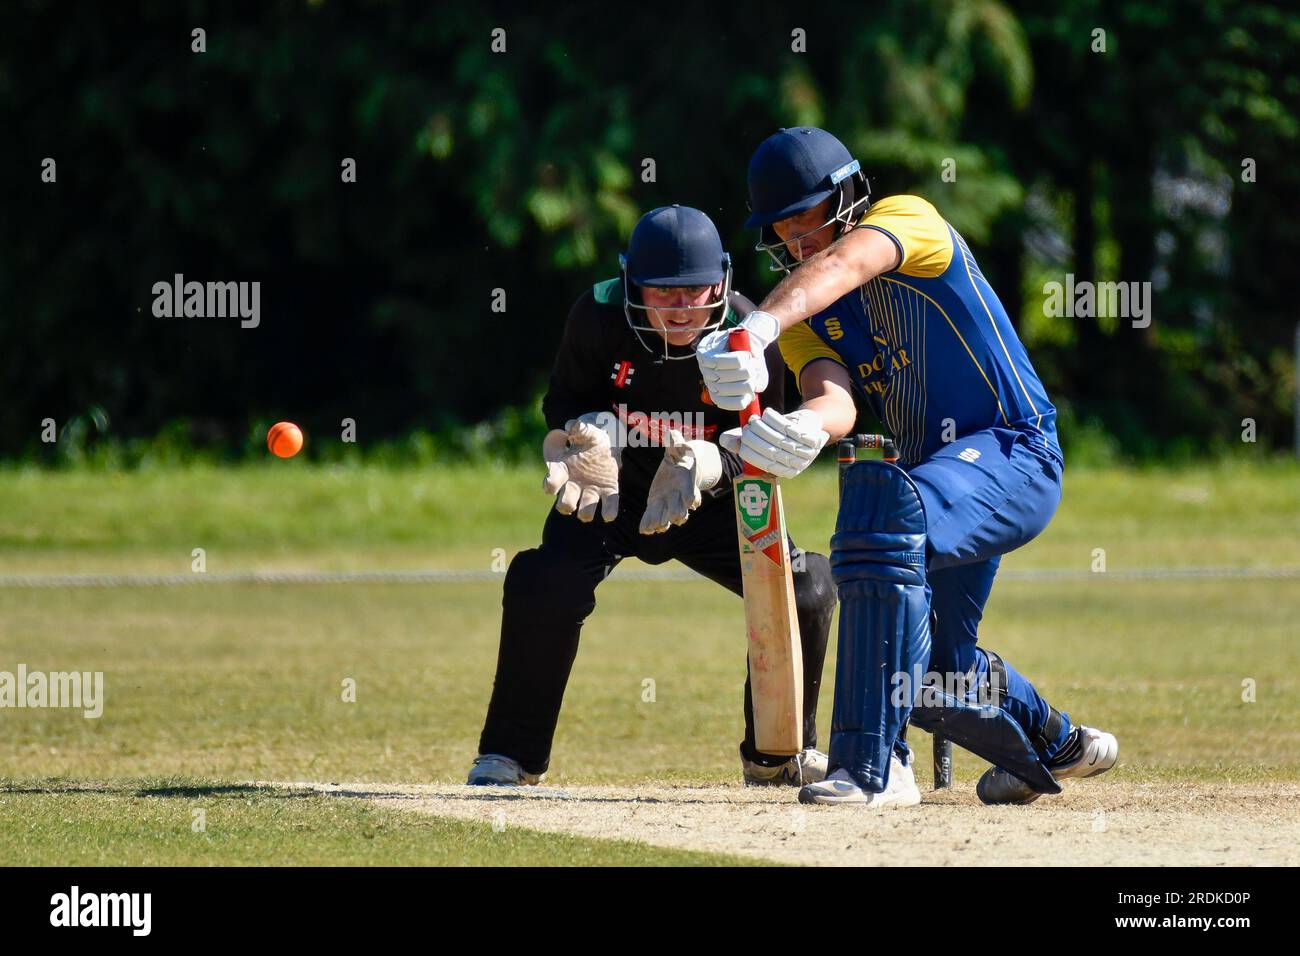 Clydach, Wales. 3 June 2023. Rhodri Davies of Clydach batting during the South Wales Premier Cricket League Division Two match between Clydach and Chepstow at Waverley Park in Clydach, Wales, UK on 3 June 2023. Credit: Duncan Thomas/Majestic Media. Stock Photo